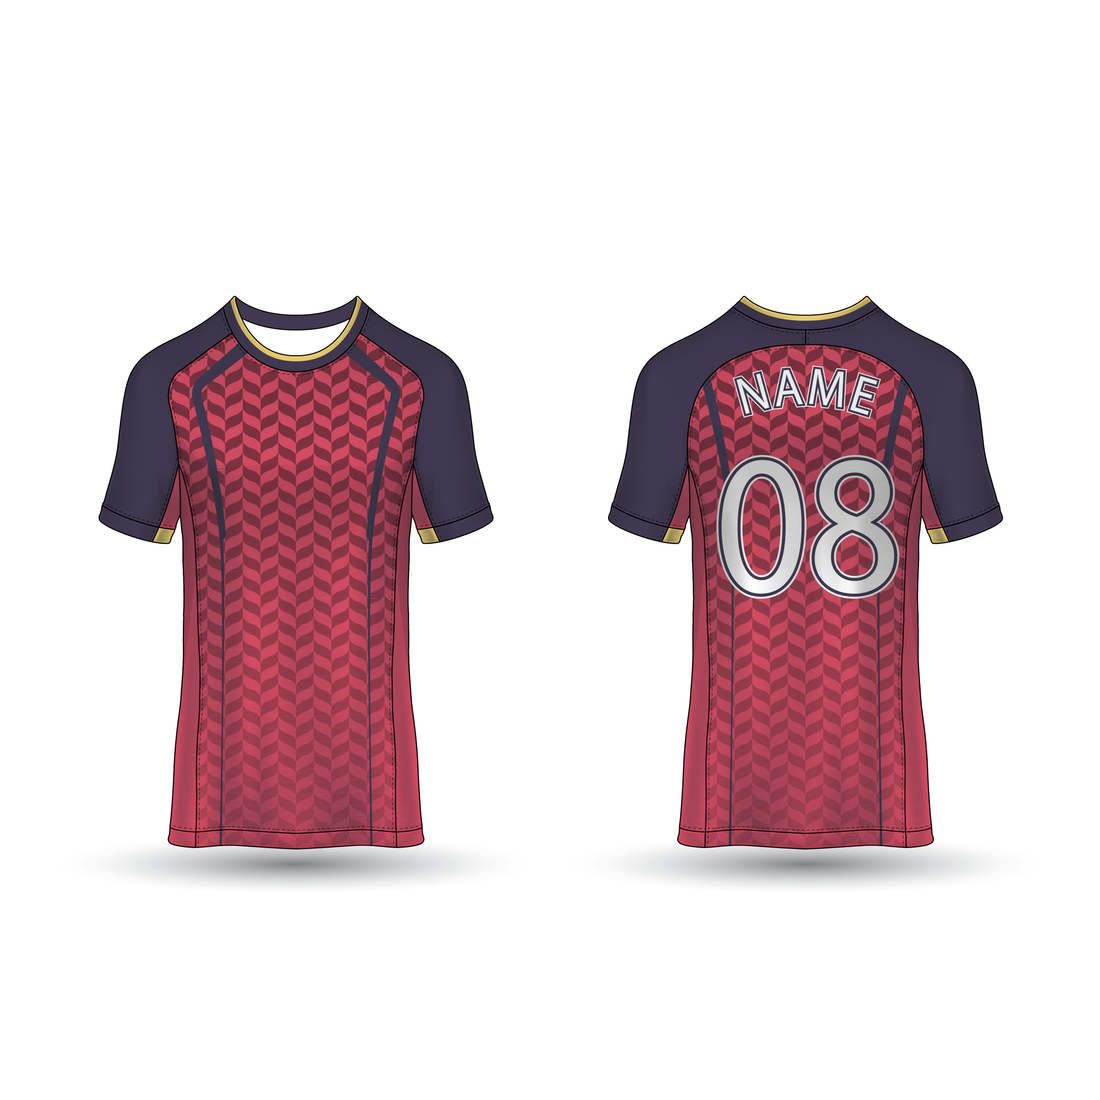 NEXT PRINT All Over Printed Customized Sublimation T-Shirt Unisex Sports Jersey Player Name & Number, Team Name NP50000269